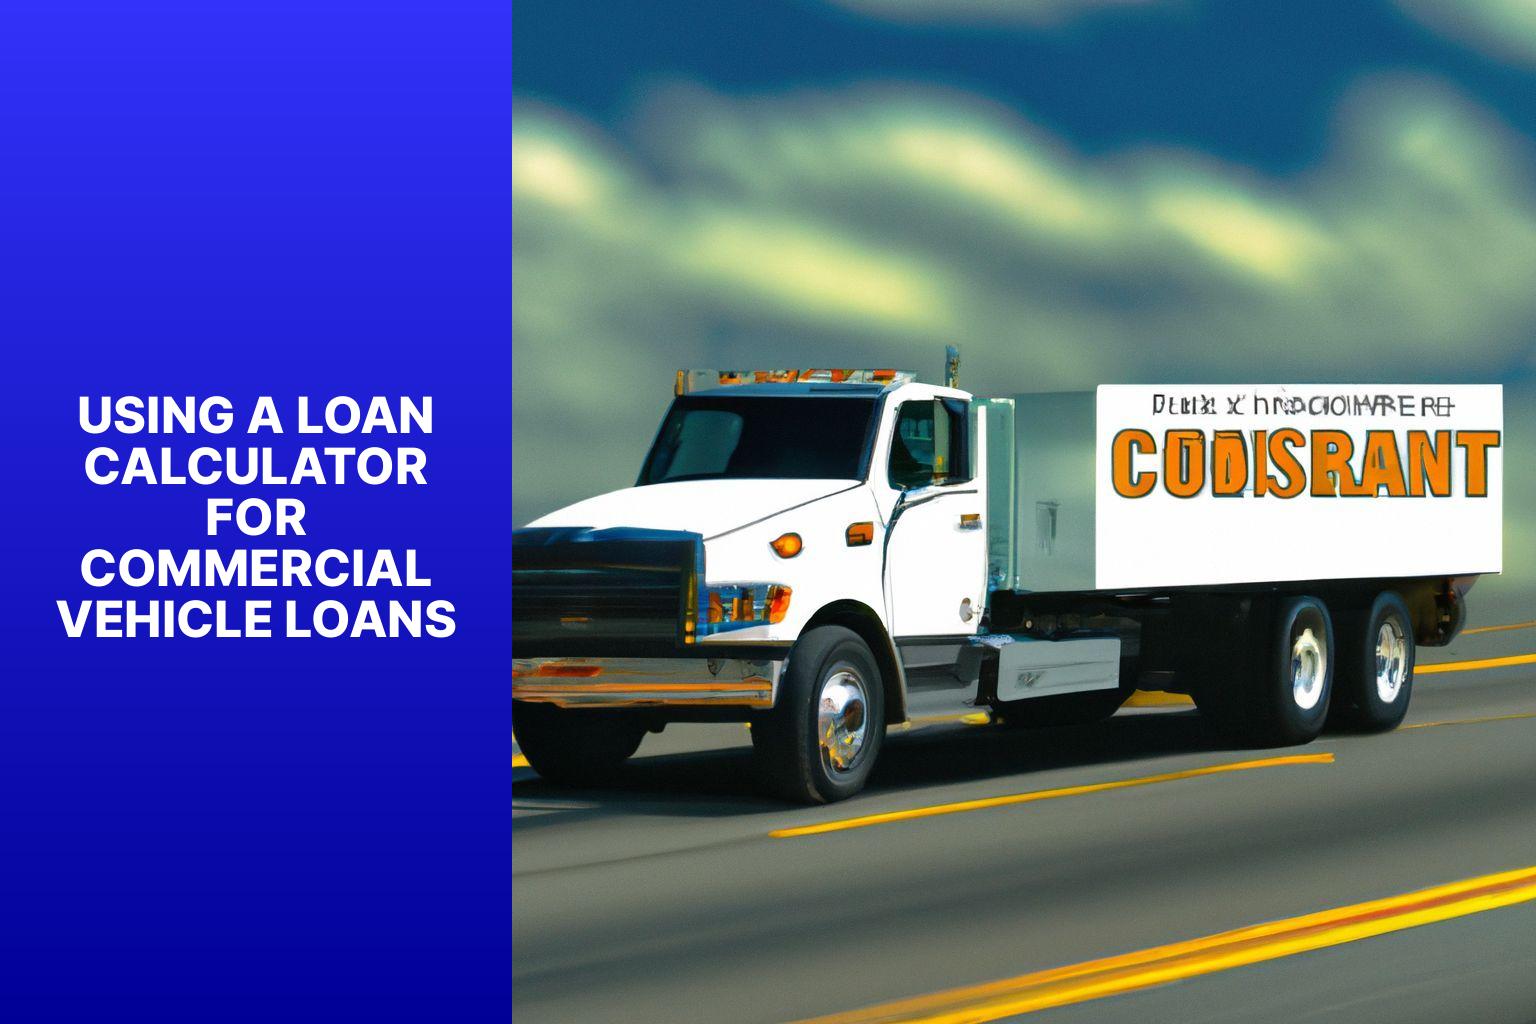 Using a Loan Calculator for Commercial Vehicle Loans - Commercial Vehicle Loans Decoded: Using a Loan Calculator 